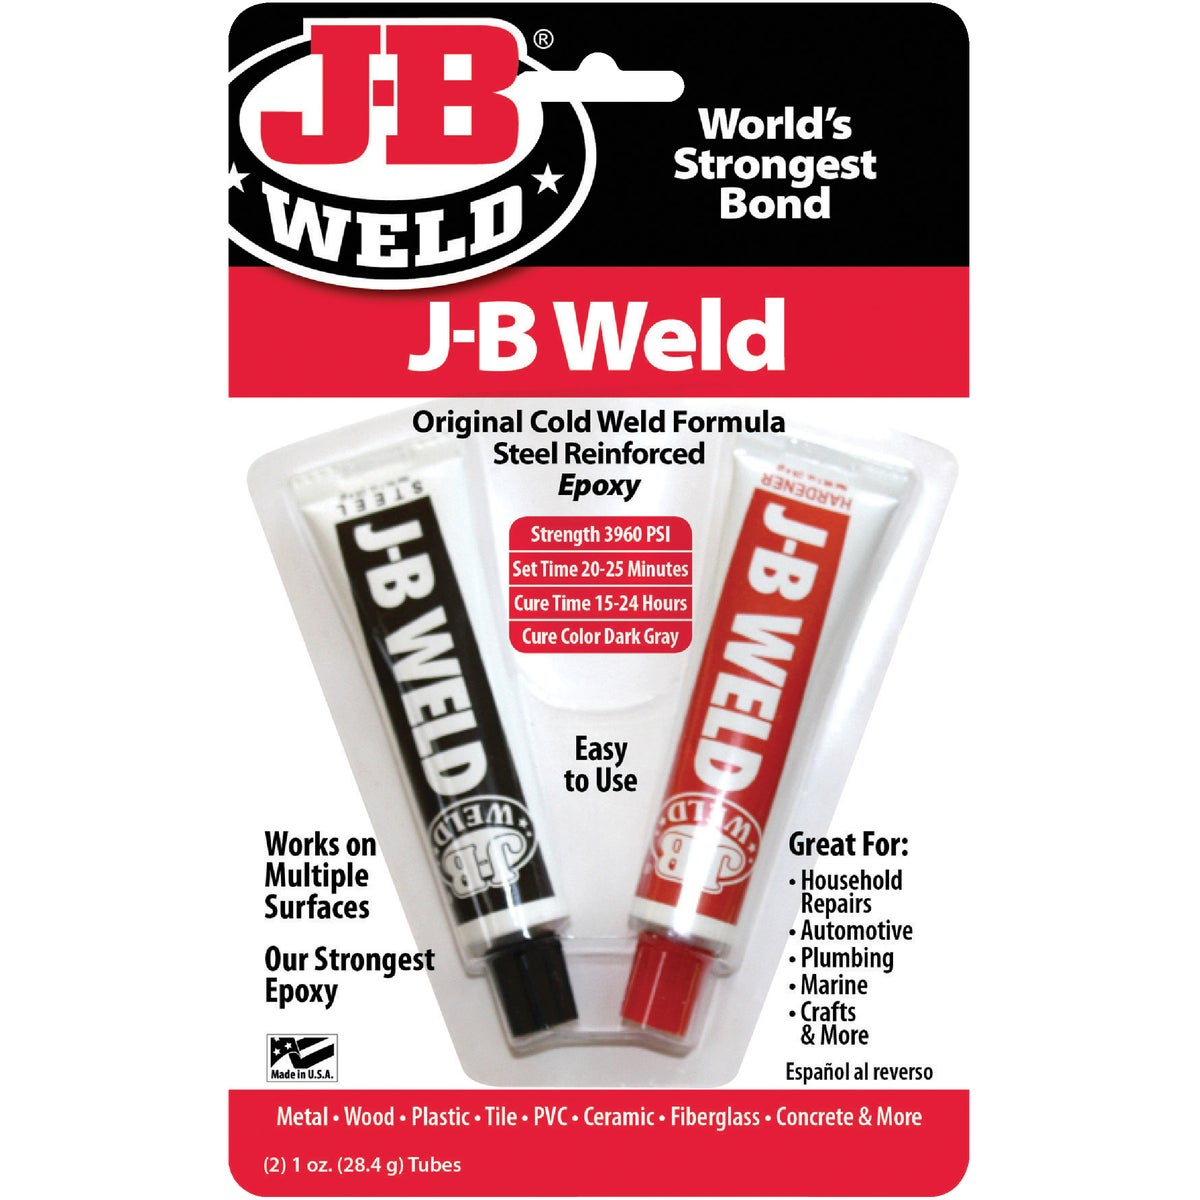 Item 332925, The Original ColdWeld two-part epoxy system provides strong, lasting 